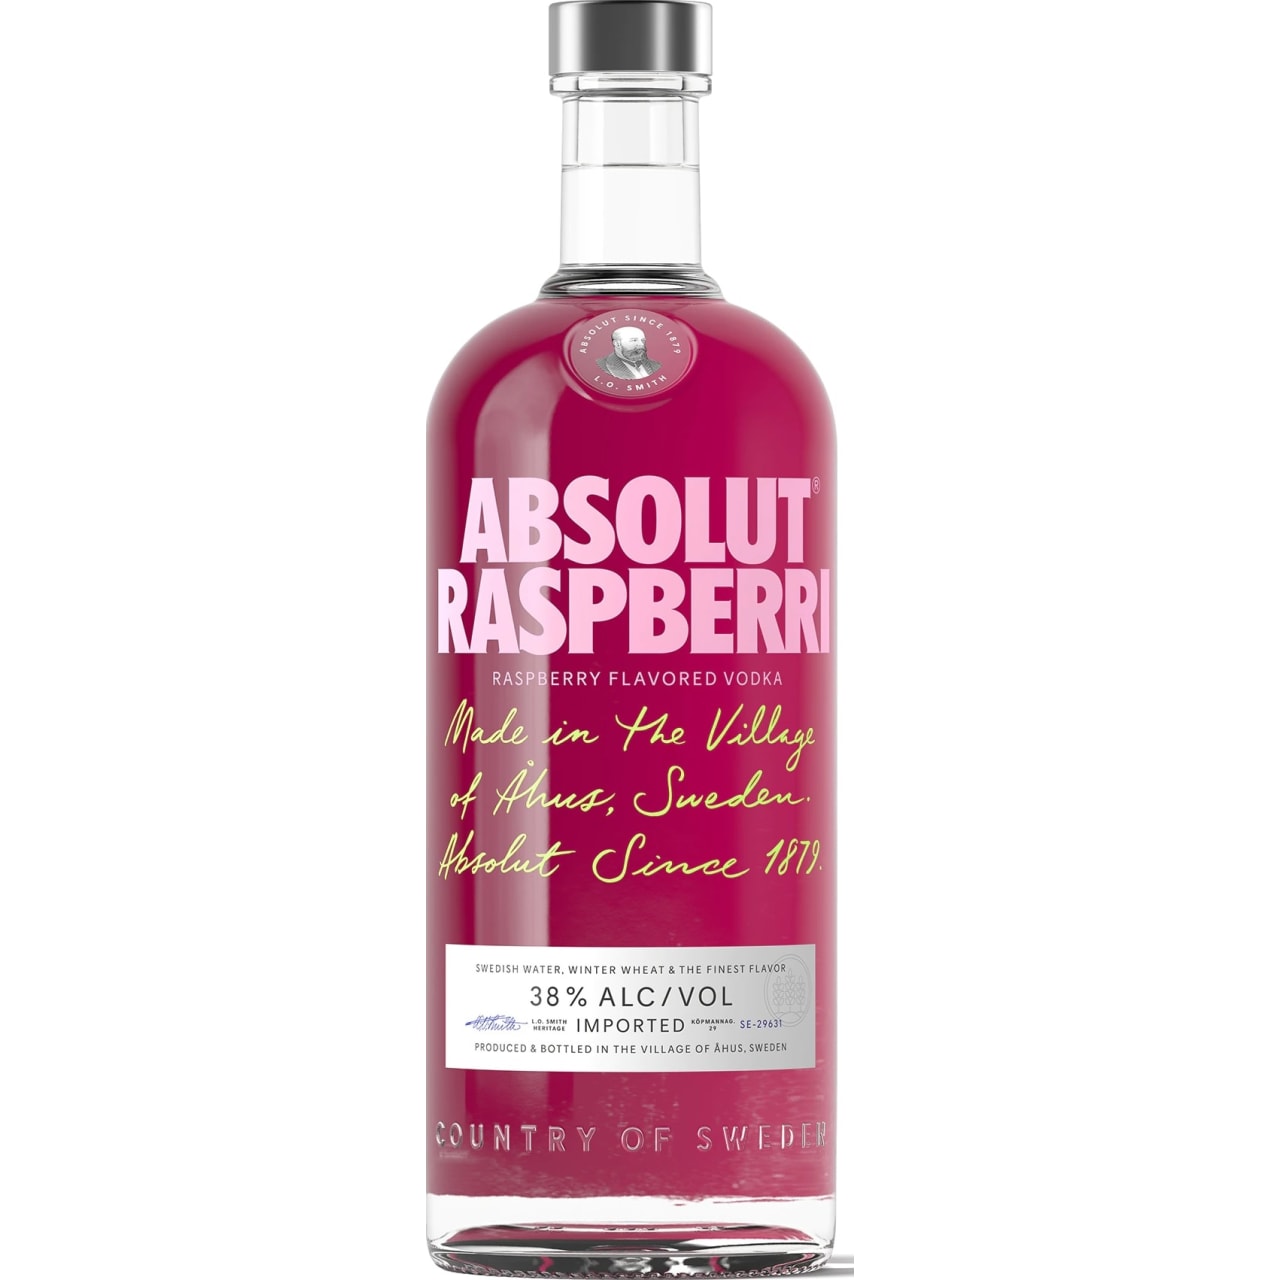 Absolut Raspberri's rich and intense flavour comes from ripened raspberries which also gives it a fresh and fruity character.